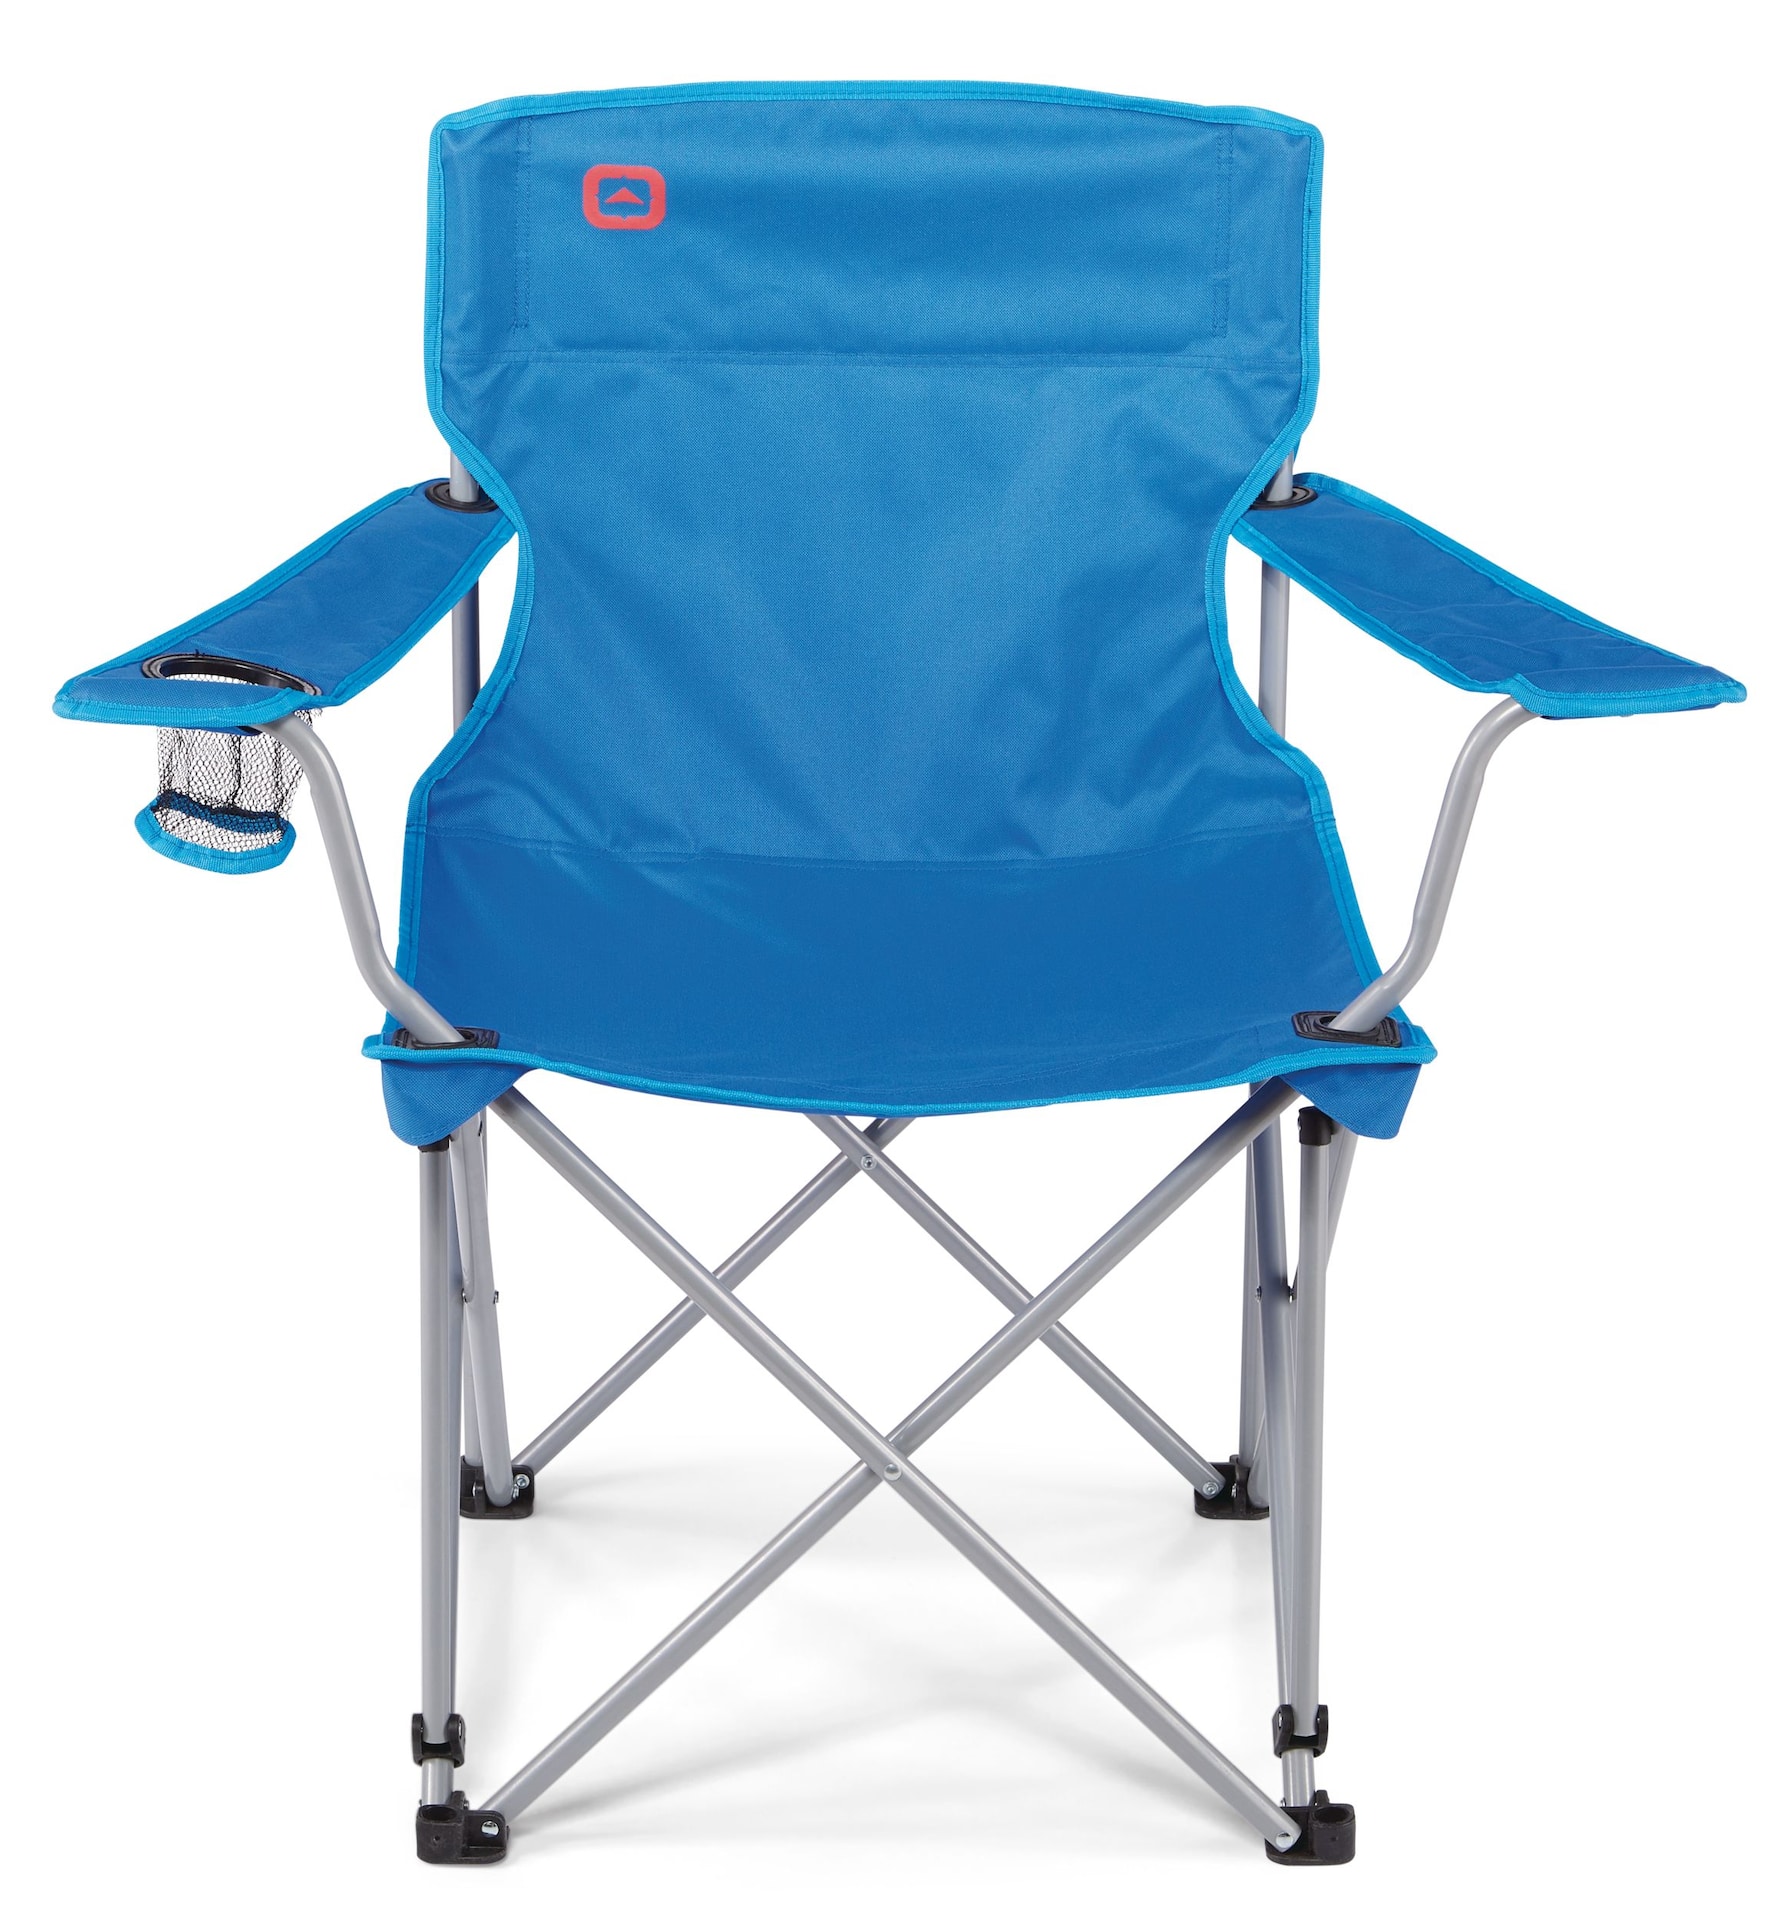 Outbound Premium Oversized Portable Folding Camping Quad Chair w